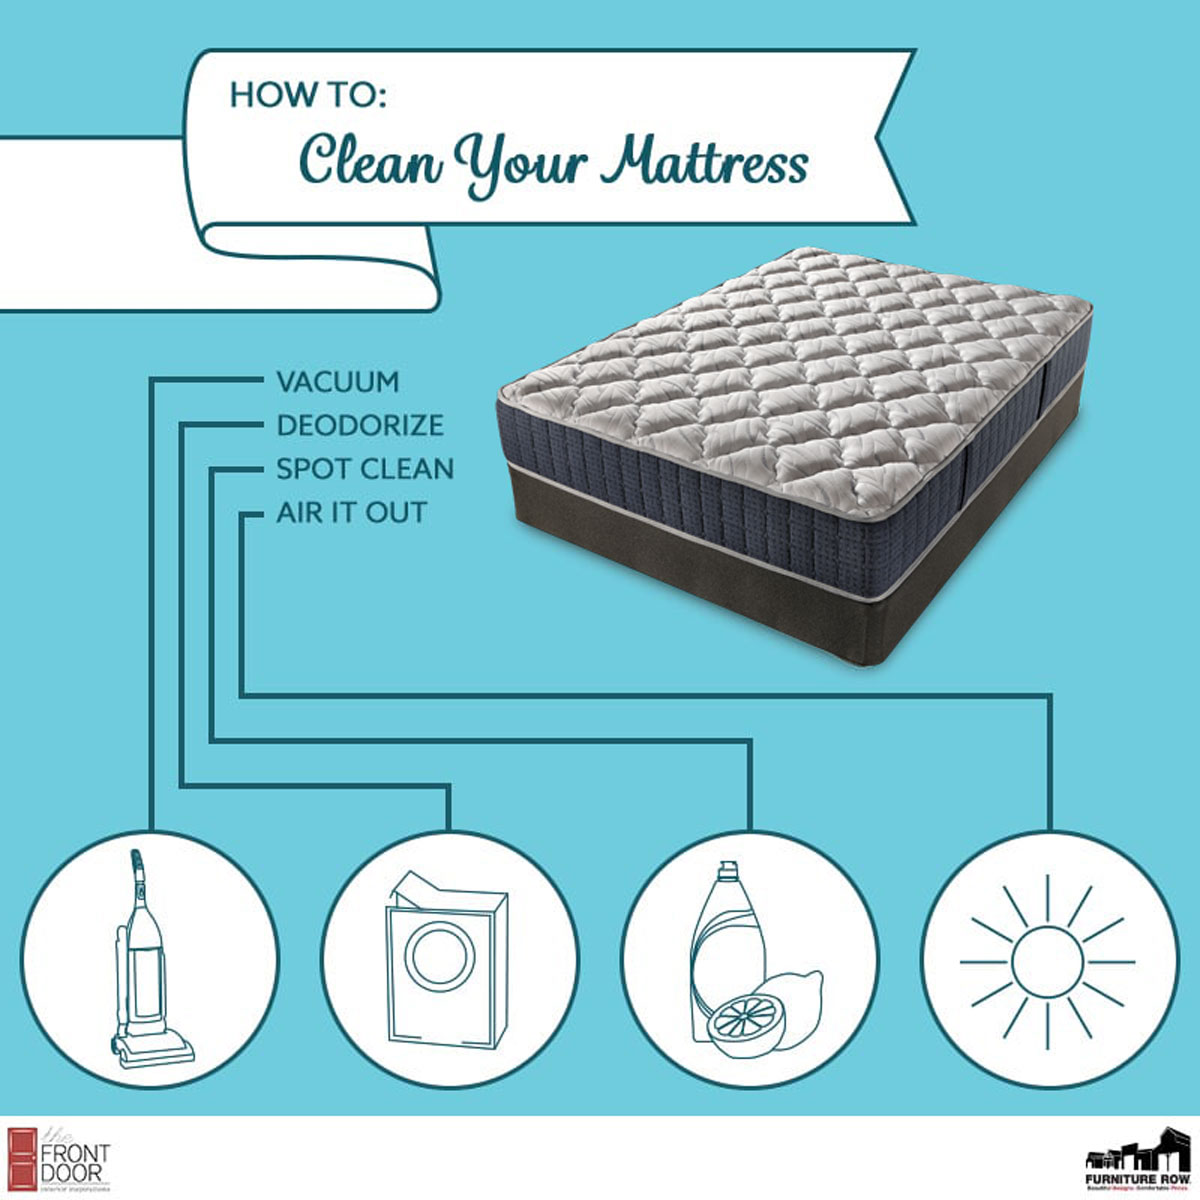 How to Clean Your Mattress.  Vacuum, Deodorize, Spot Clean, Air it Out. 